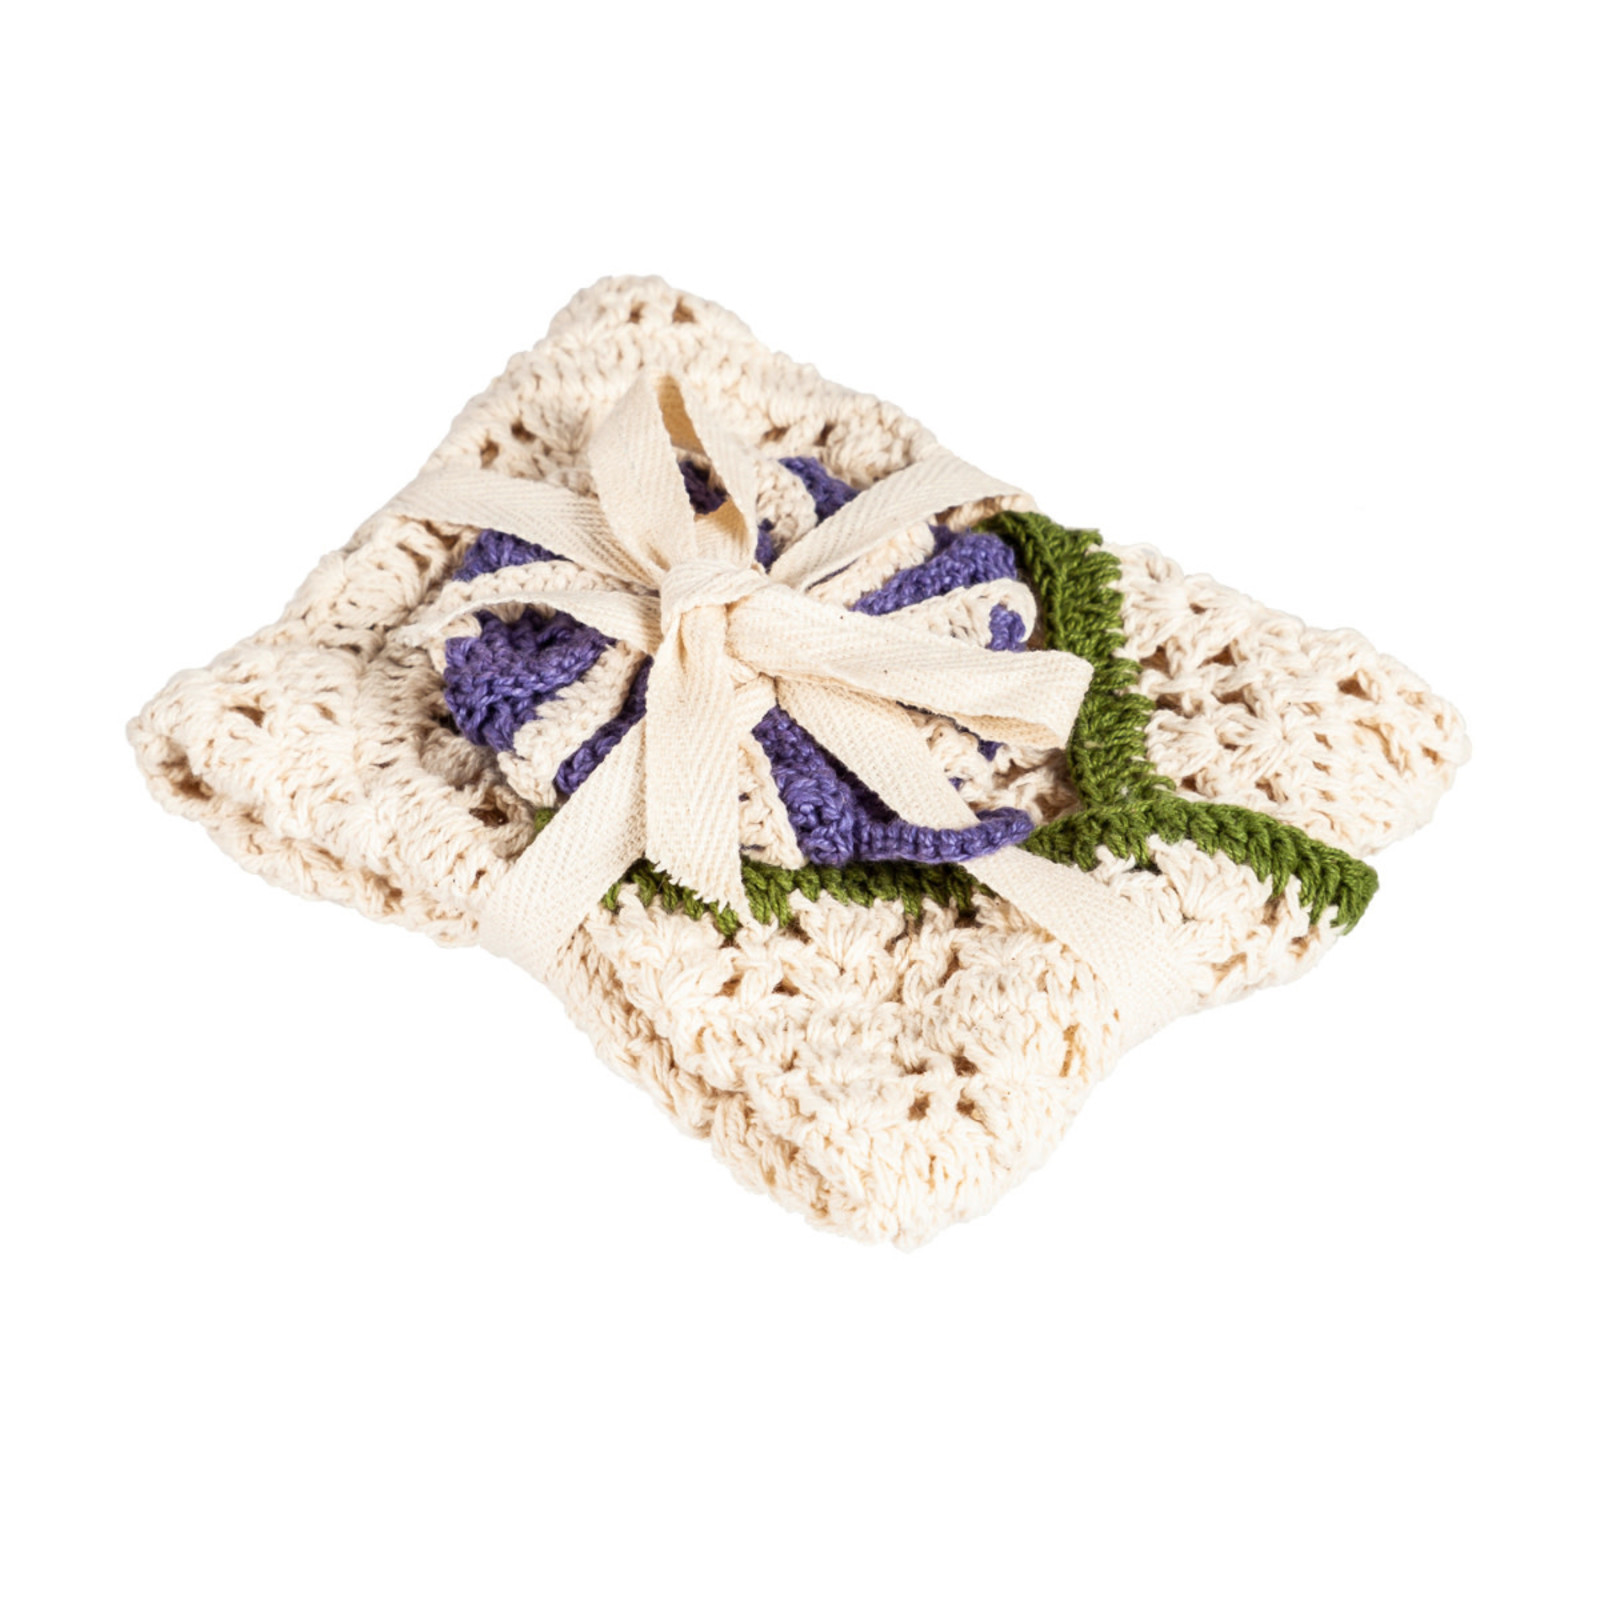 Evergreen Enterprises Cotton Dish Cloth and Scrubber     4DTS010 loading=